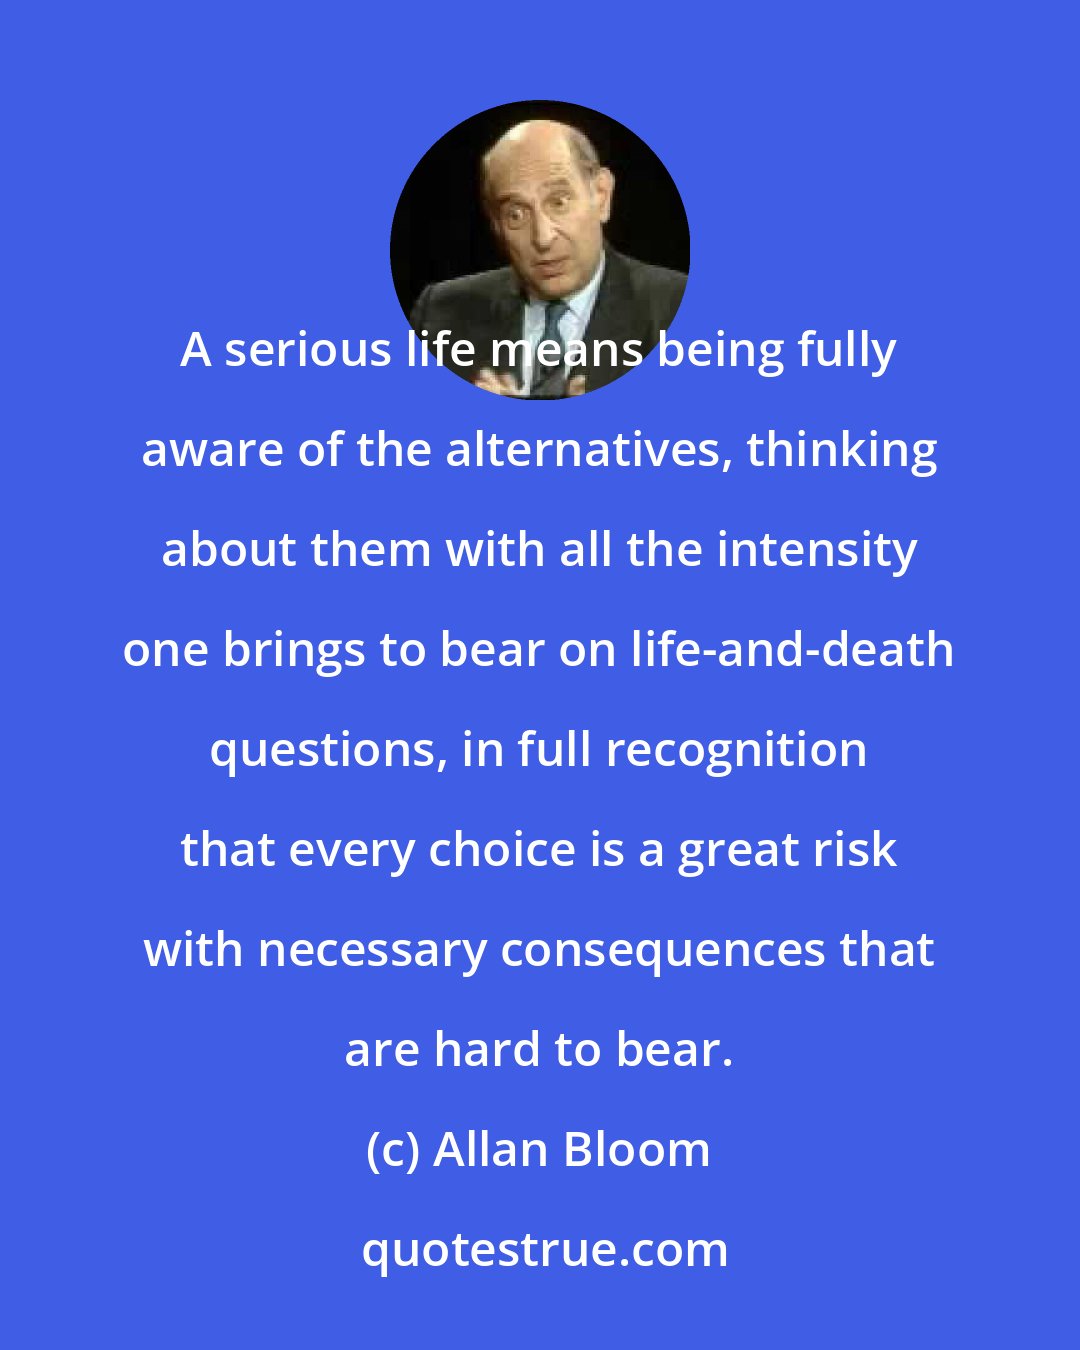 Allan Bloom: A serious life means being fully aware of the alternatives, thinking about them with all the intensity one brings to bear on life-and-death questions, in full recognition that every choice is a great risk with necessary consequences that are hard to bear.